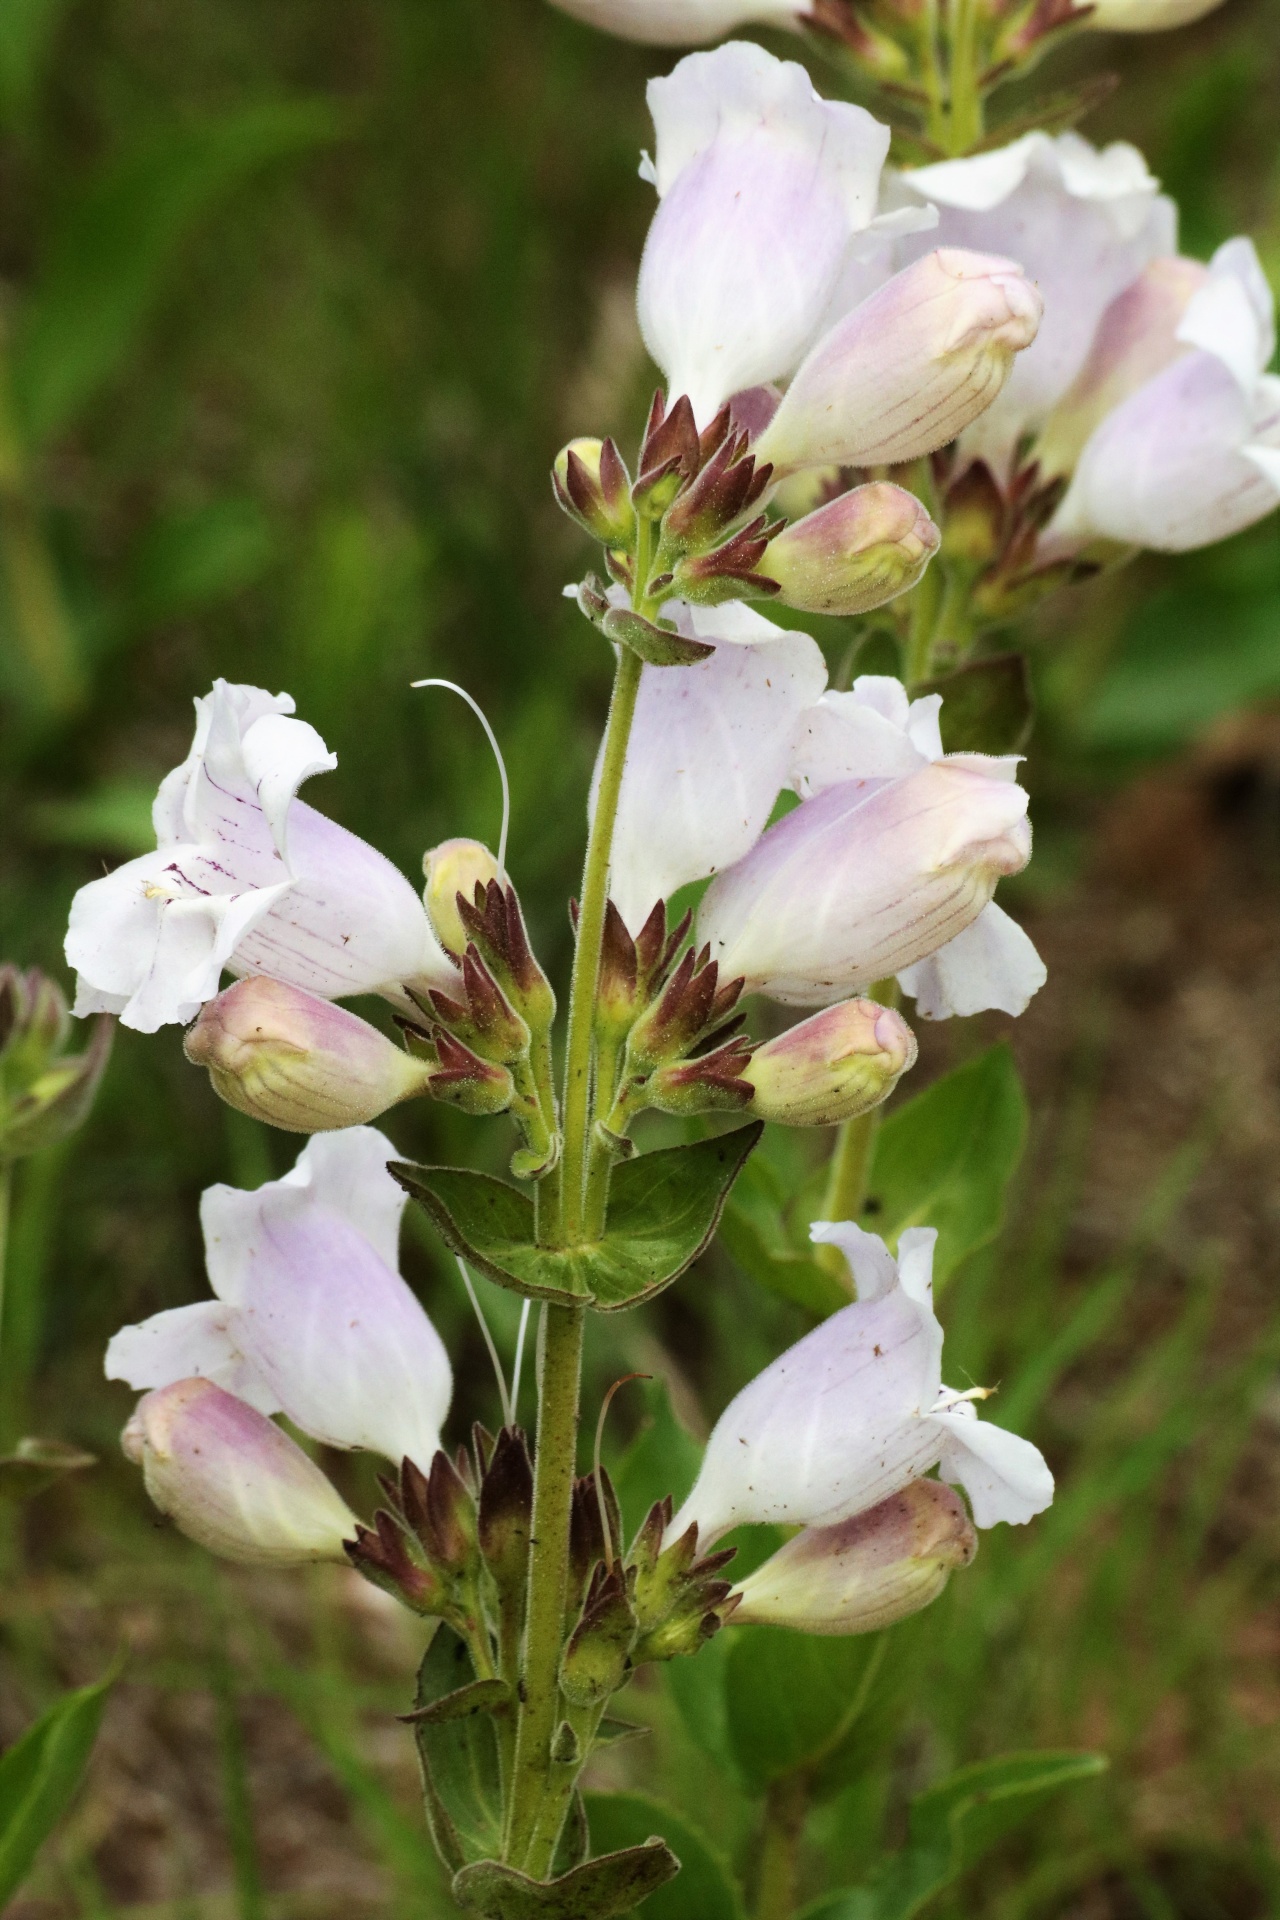 Close-up of a tall stem of white cobaea beardtongue wildflowers growing in a country field.